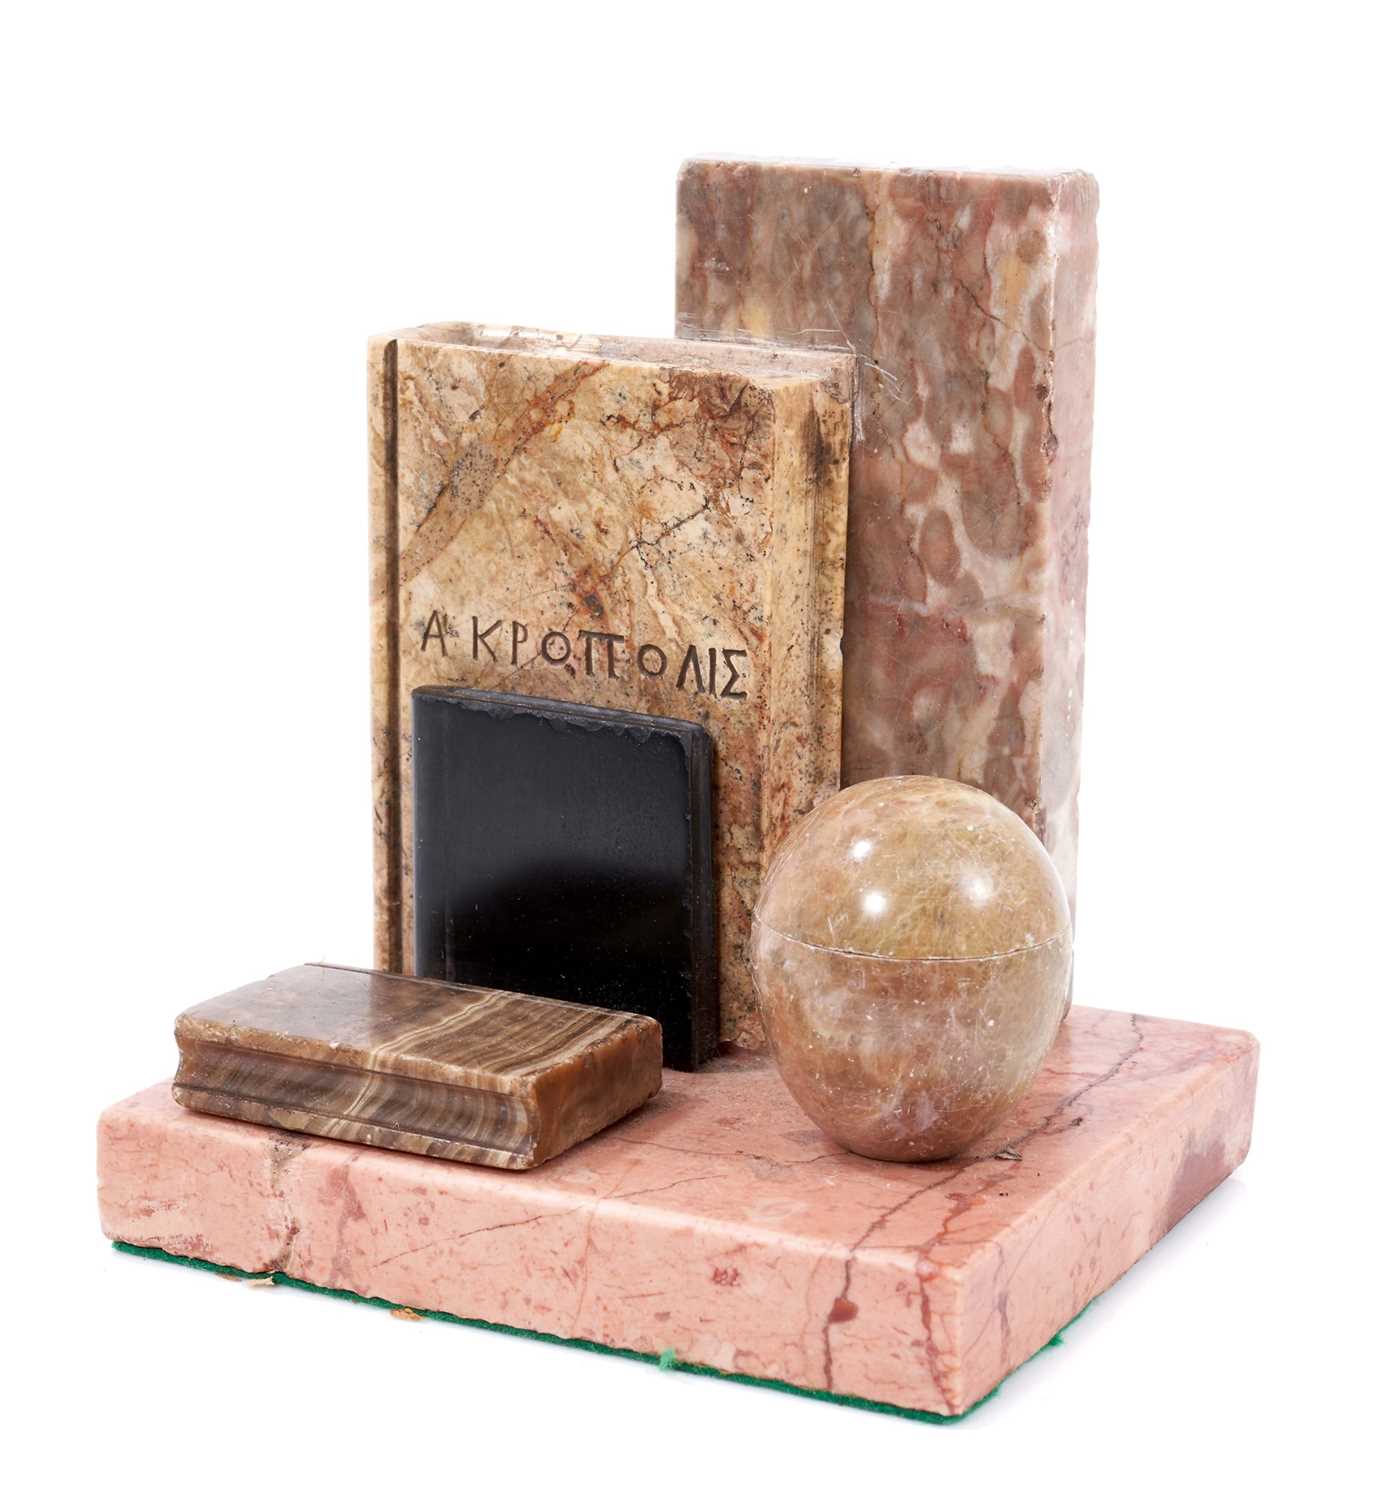 19th century Grand Tour specimen marble desk stand or paperweight, modelled as a pile of books, with